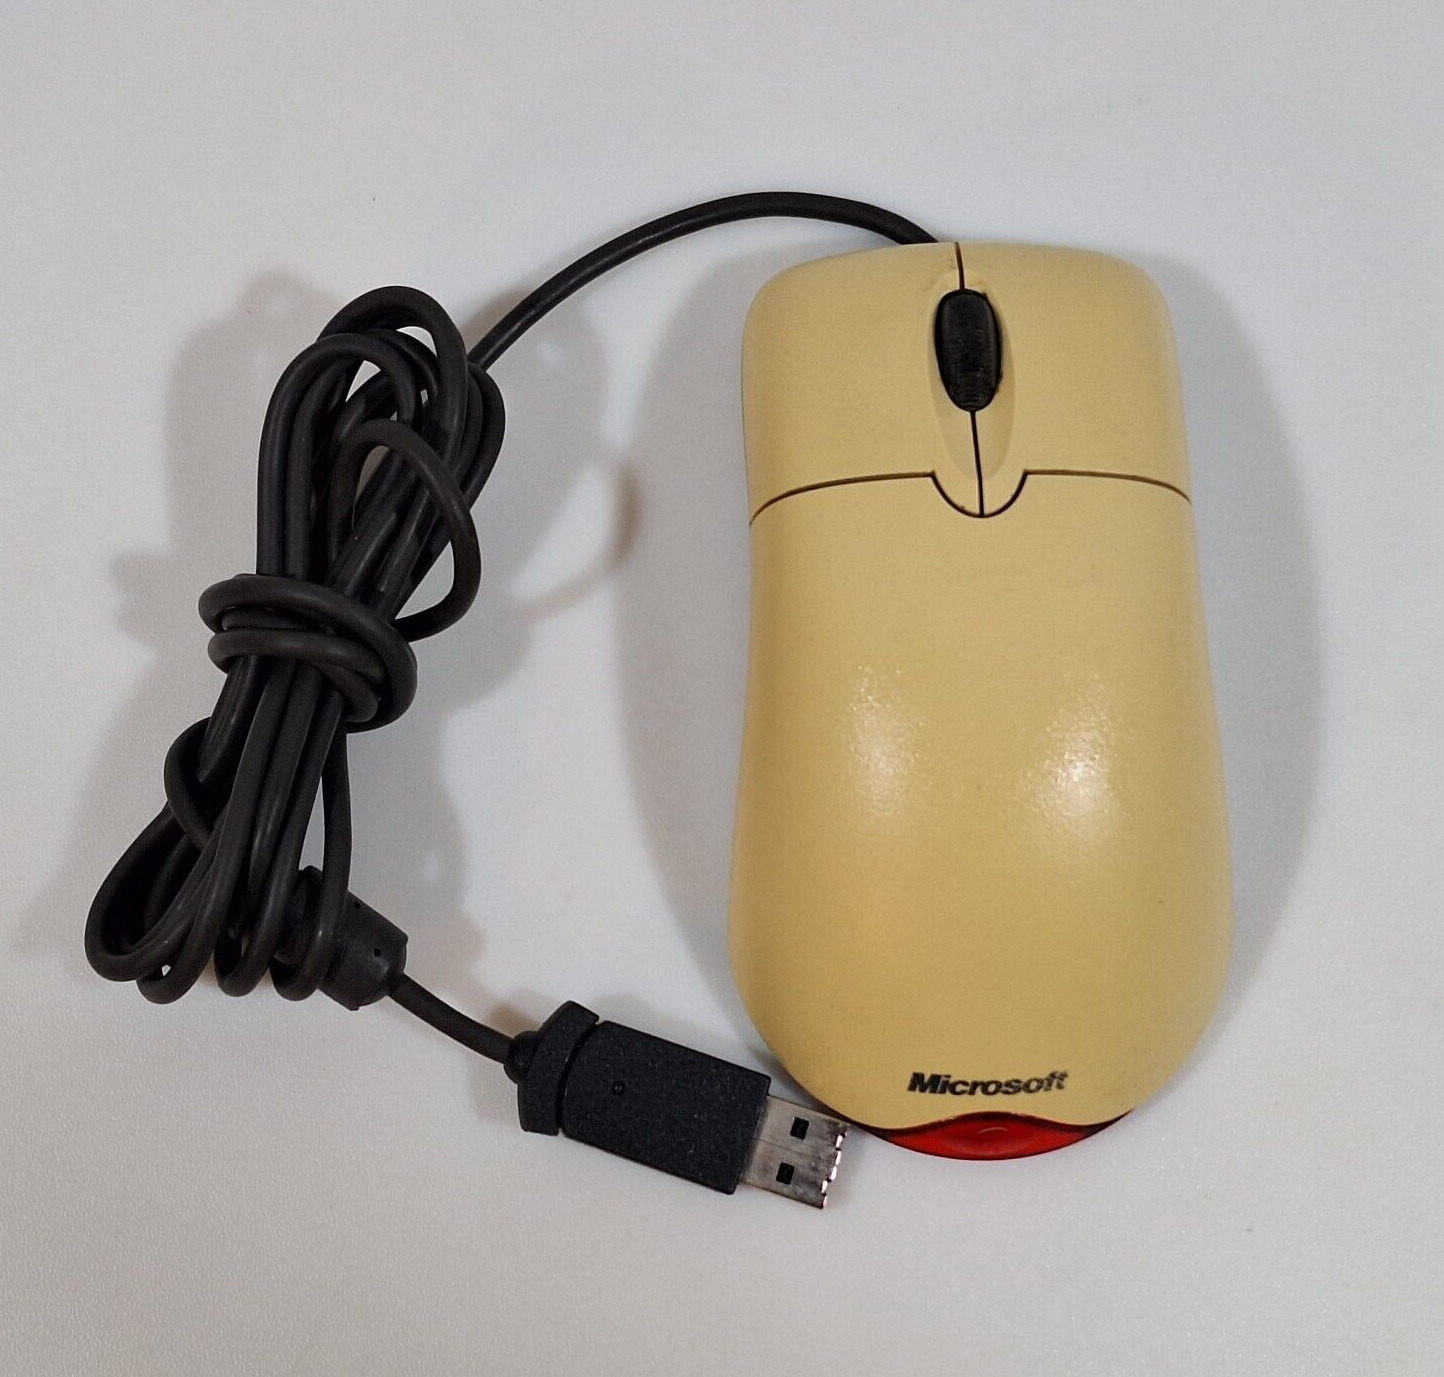 Vintage Off White Microsoft Wheel Mouse Optical USB Mouse 1.1/1.1a - Good+ Cond